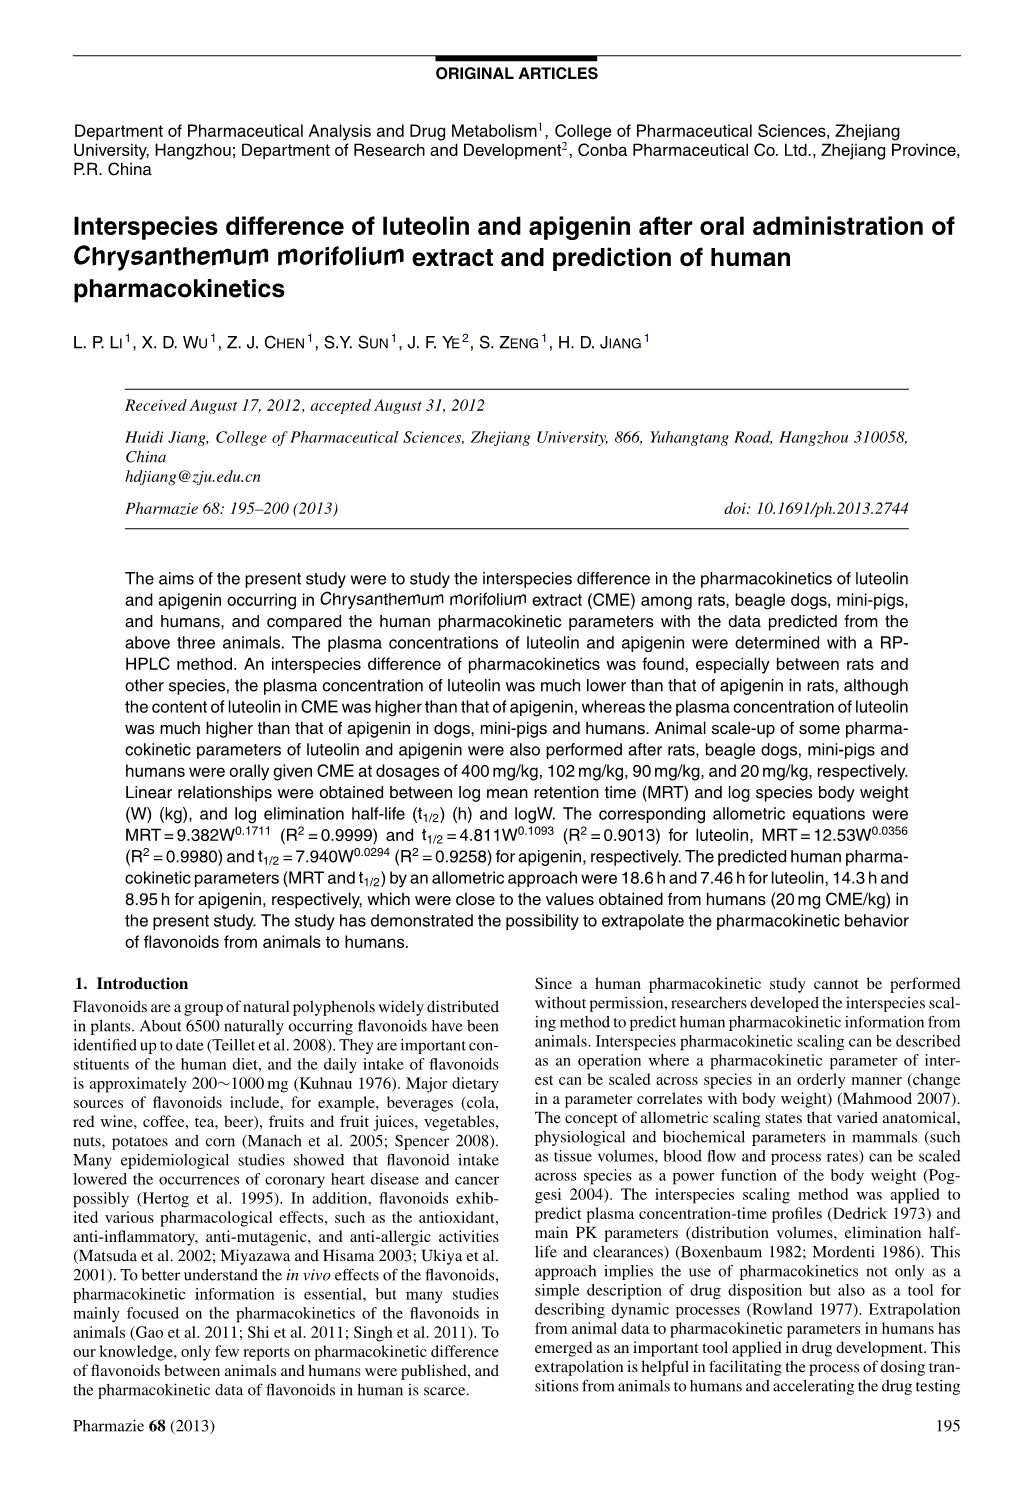 Interspecies Difference of Luteolin and Apigenin After Oral Administration of Chrysanthemum Morifolium Extract and Prediction of Human Pharmacokinetics